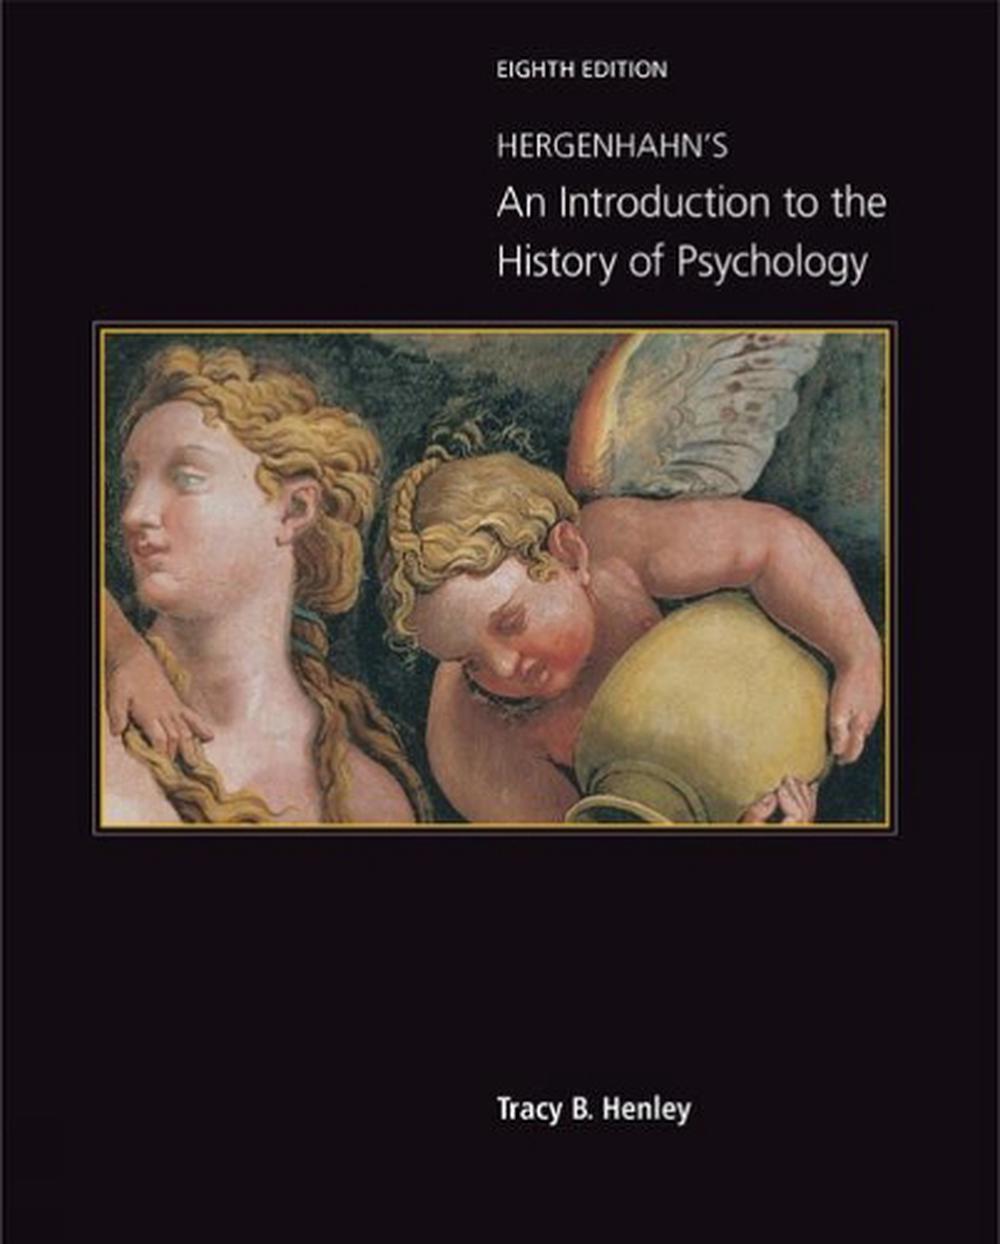 introduction and history of psychology